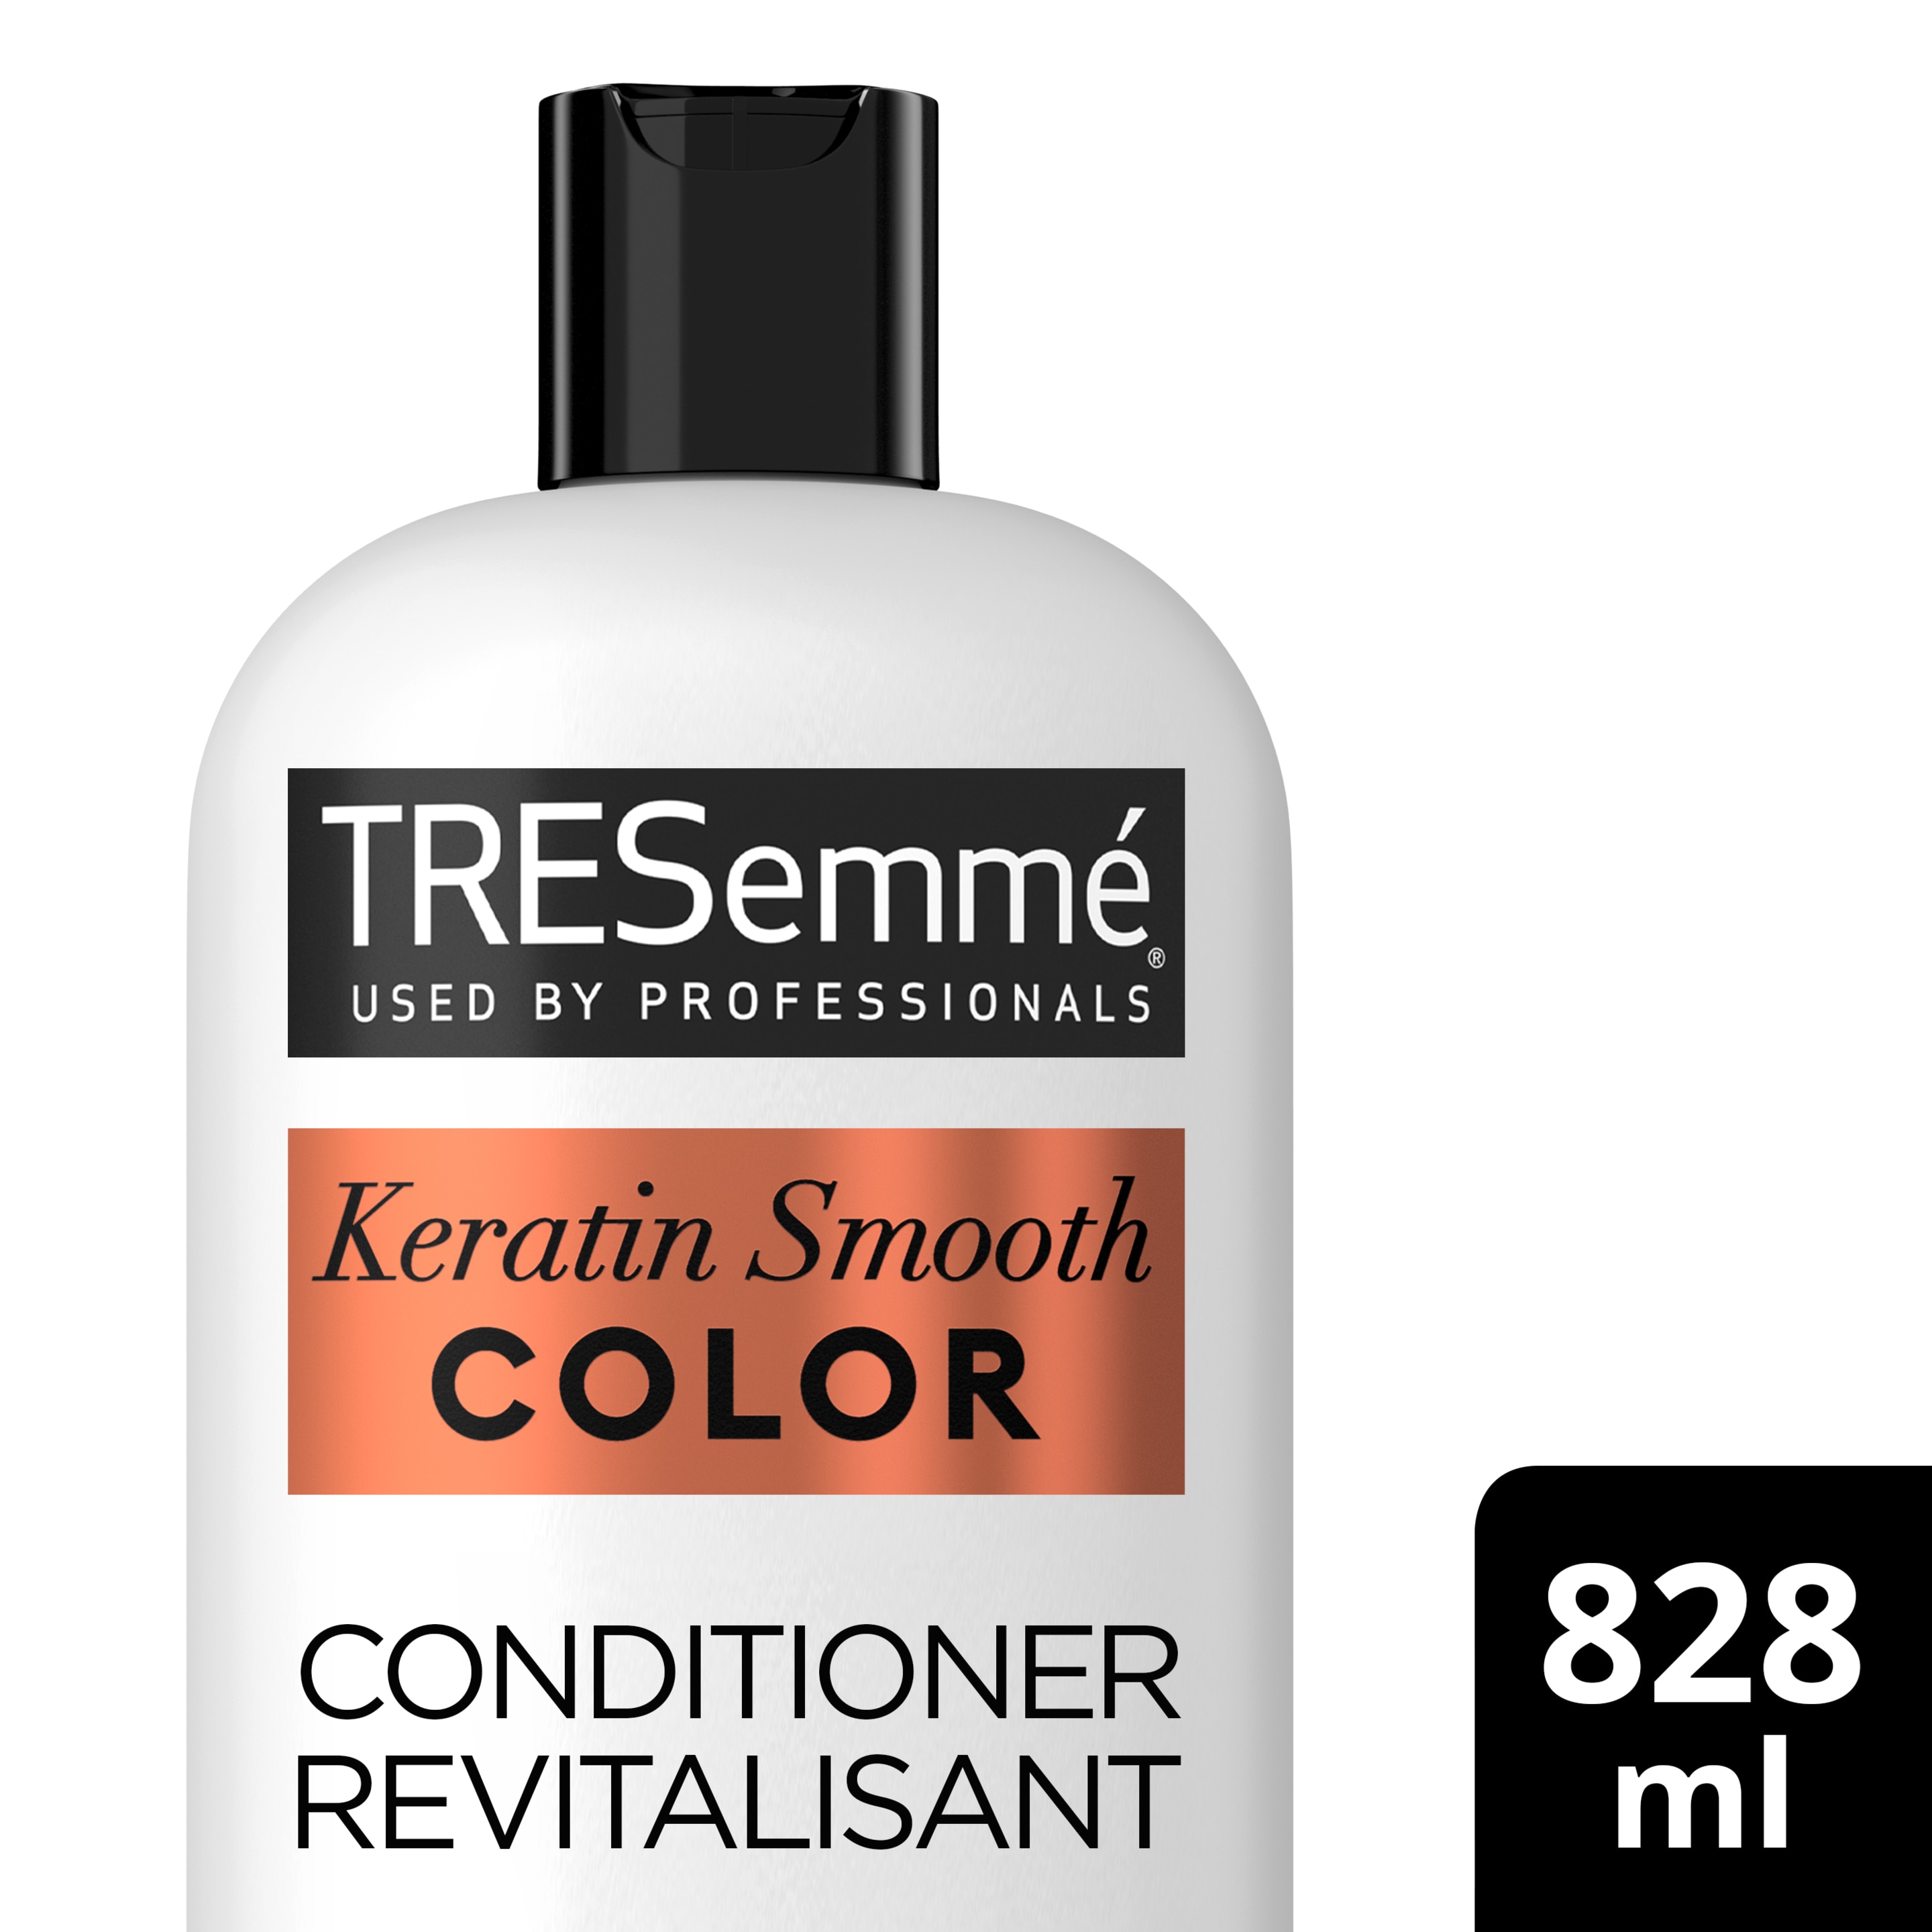 Keratin Smooth Color Conditioner for Colored Hair